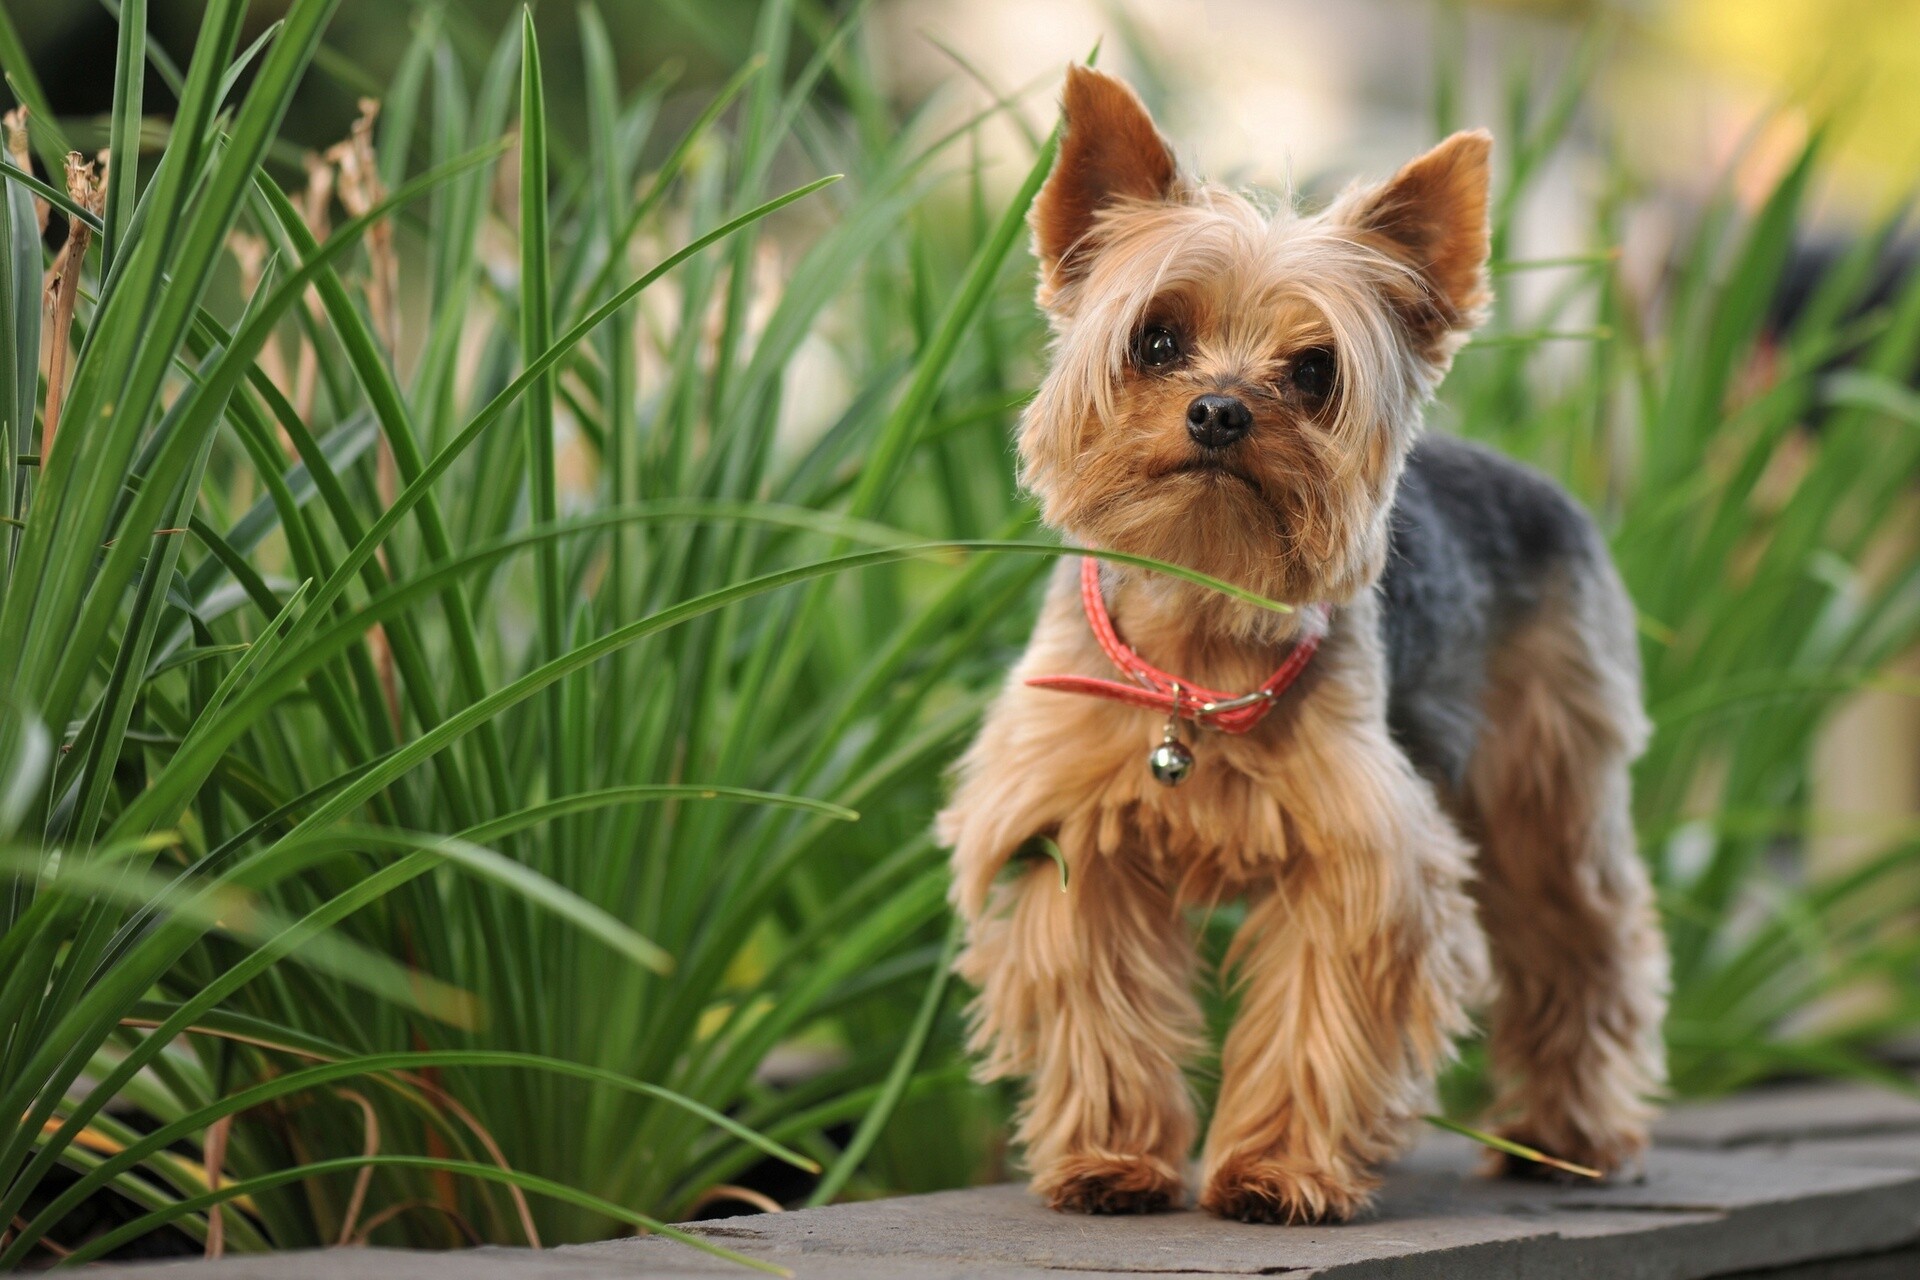 Yorkshire Terrier: For the breed, importance is placed on coat color, quality, and texture. 1920x1280 HD Wallpaper.